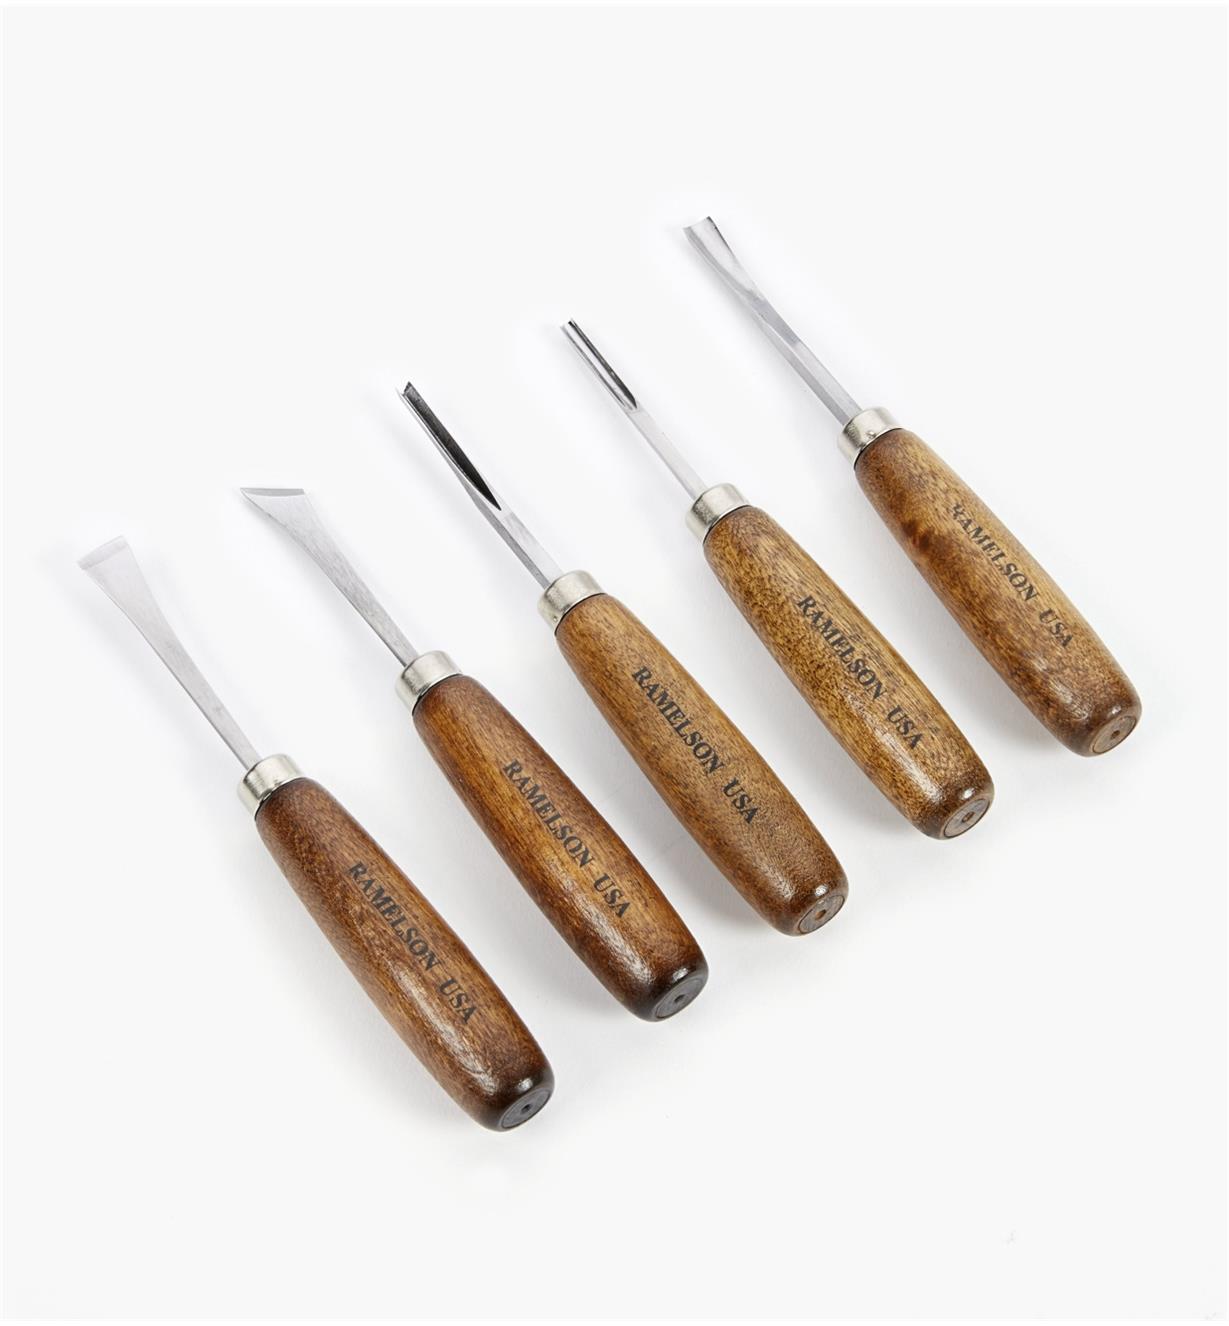 57D0502 - Set of 5 Long-Handle Basic Carving Tools